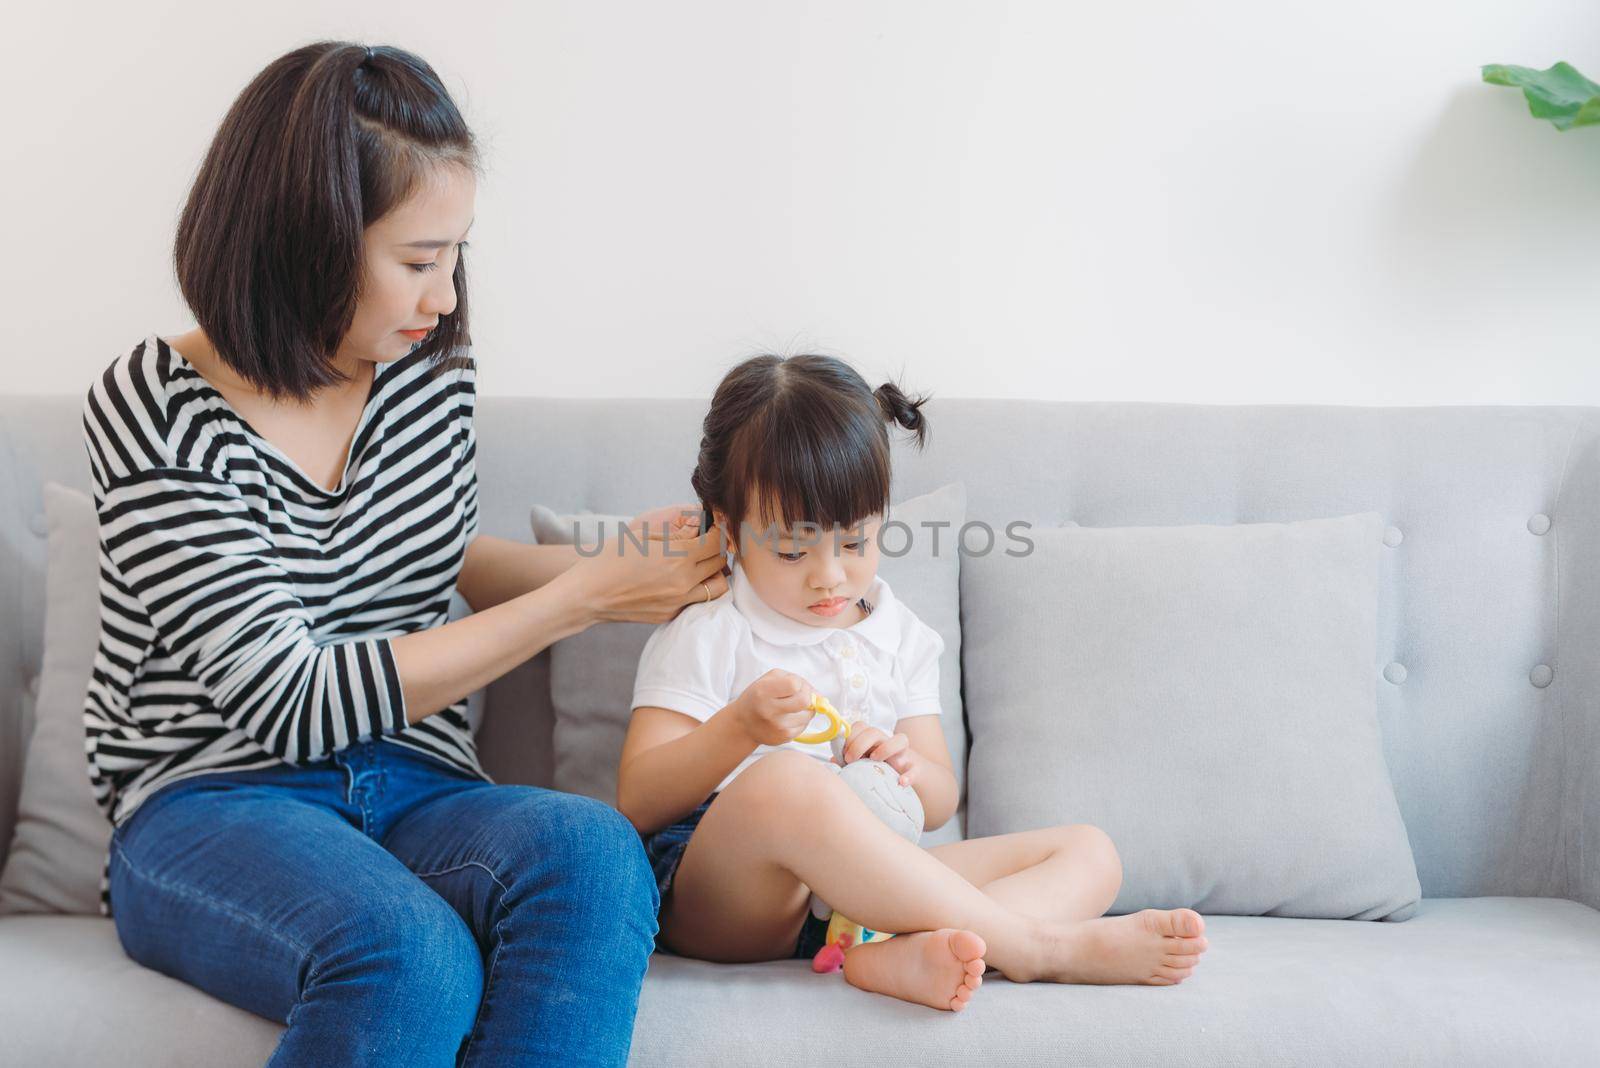 Mother combing daughter, care about hairstyle.